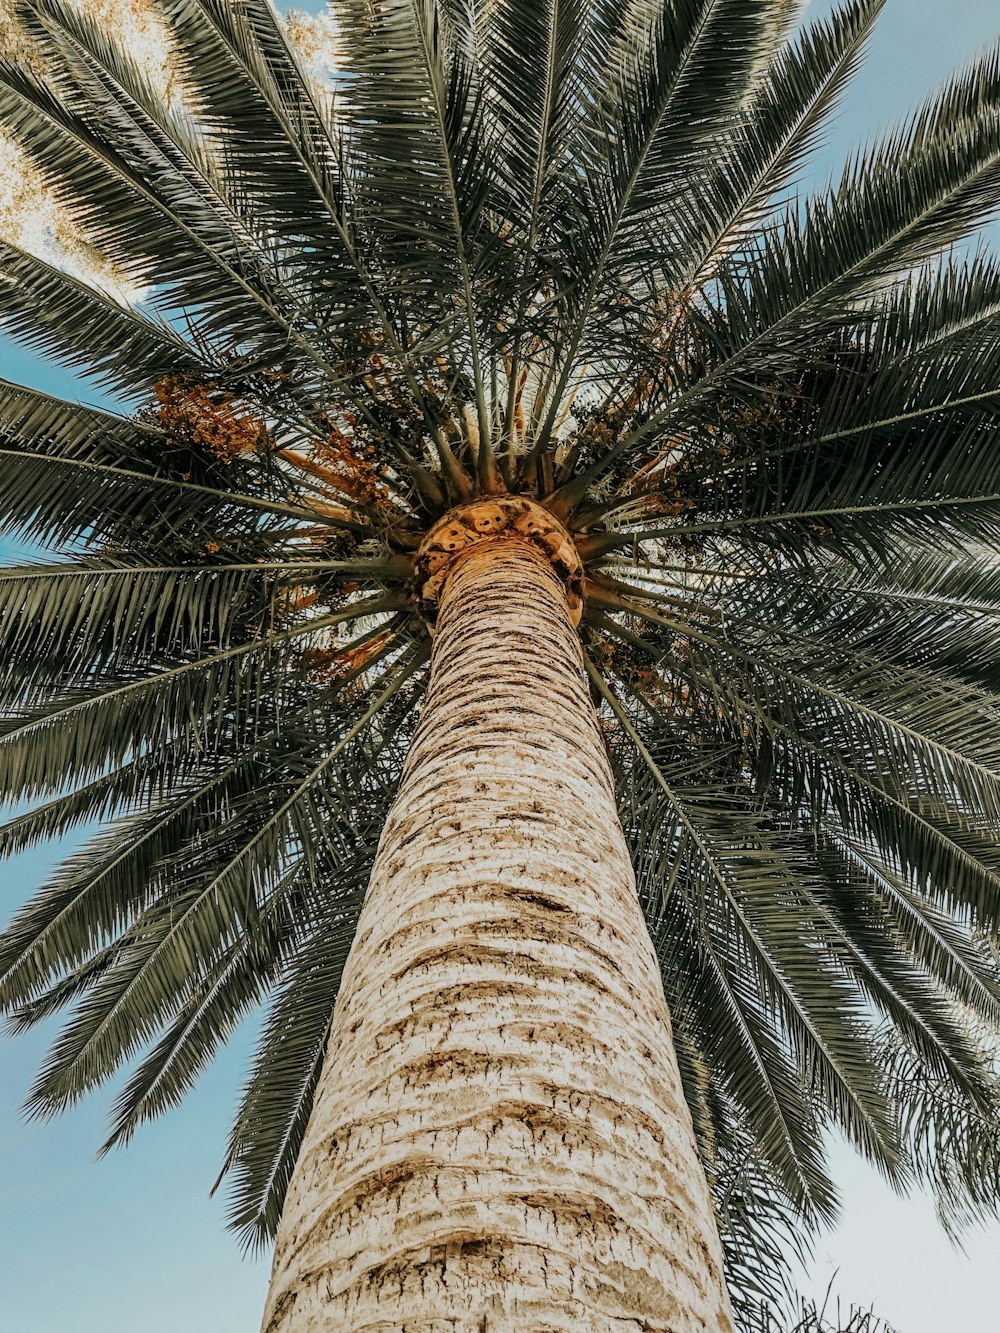 worm's eye view of a coconut tree